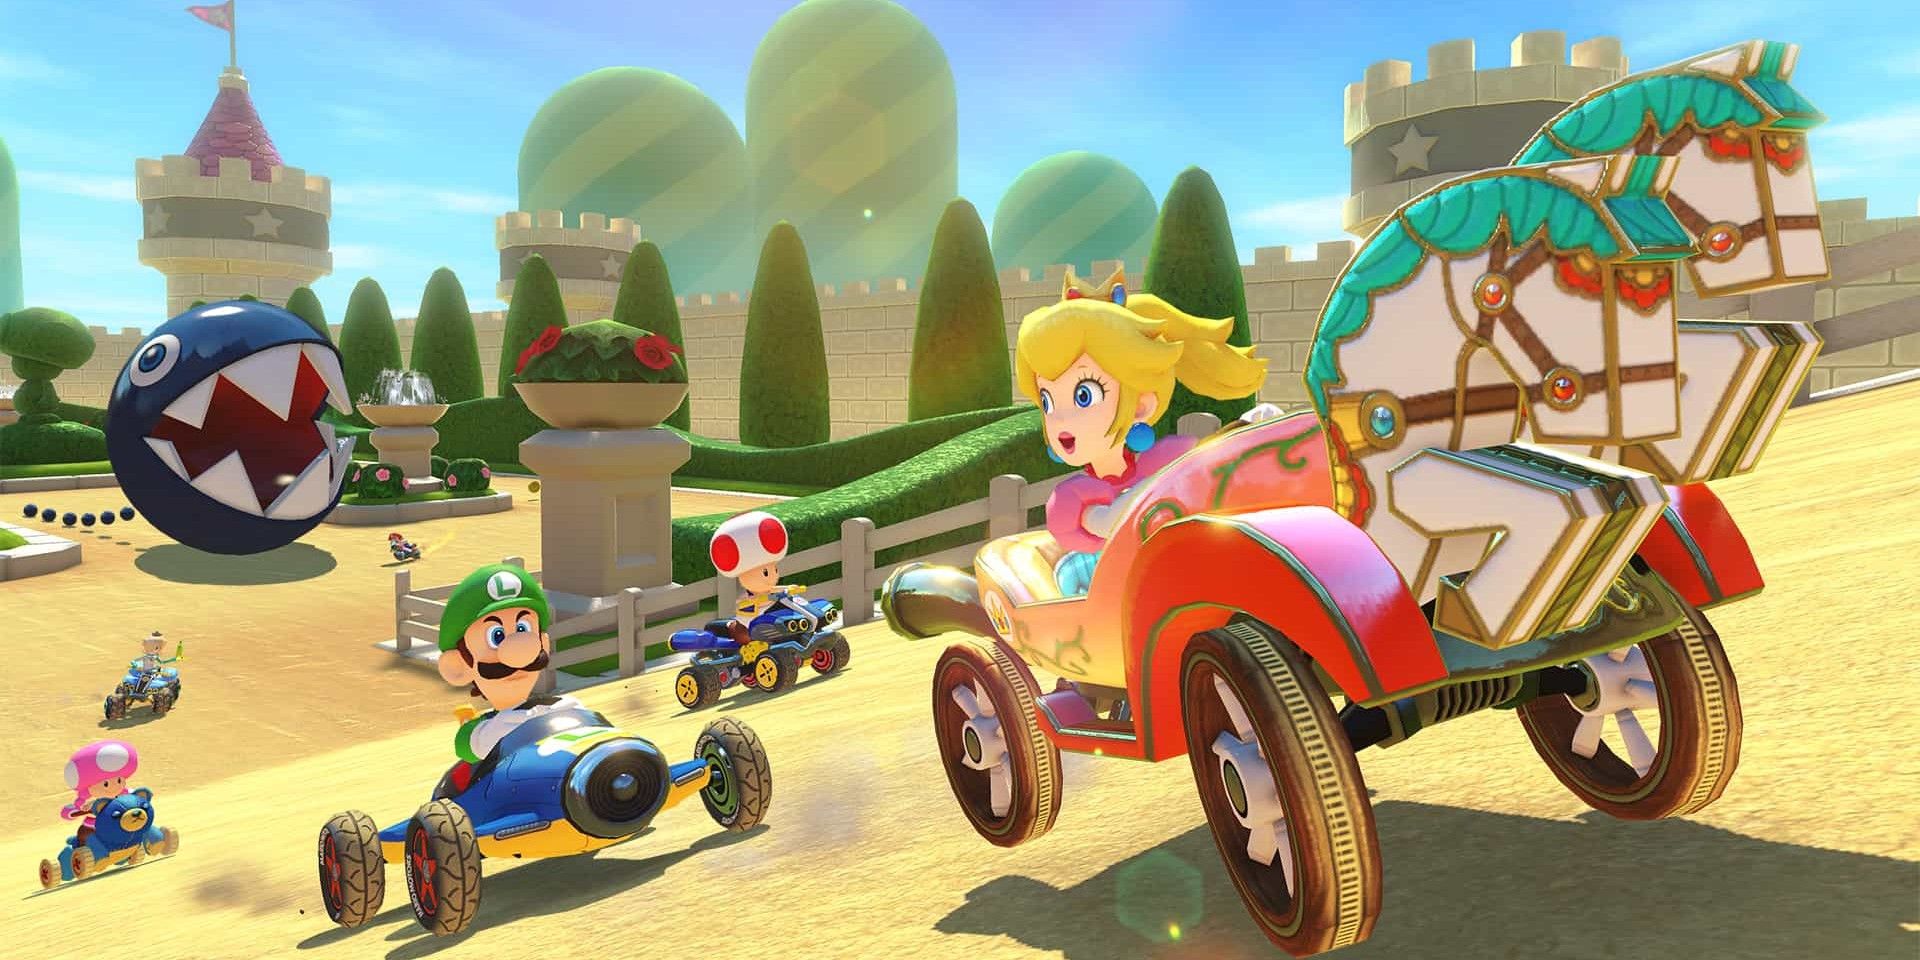 Peach Garden Mario Kart 8 race with Peach in front and Luigi, Toad, Toadette, and a Chain Chomp behind her.